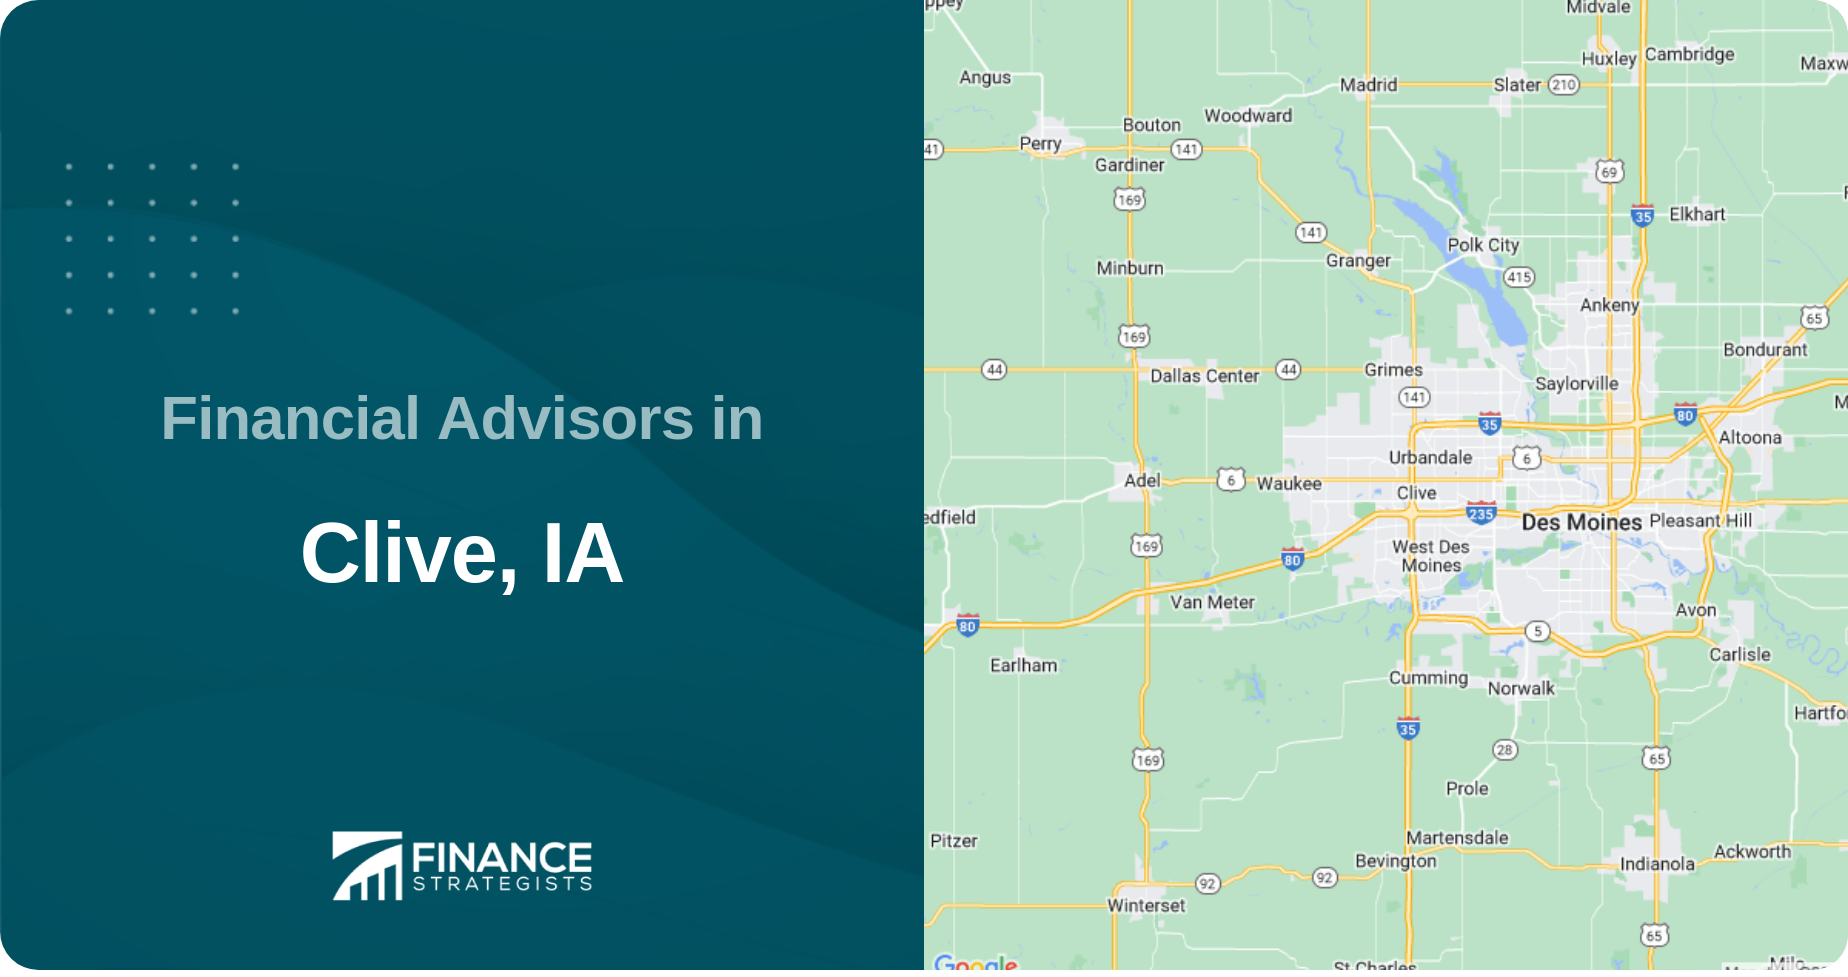 Financial Advisors in Clive, IA